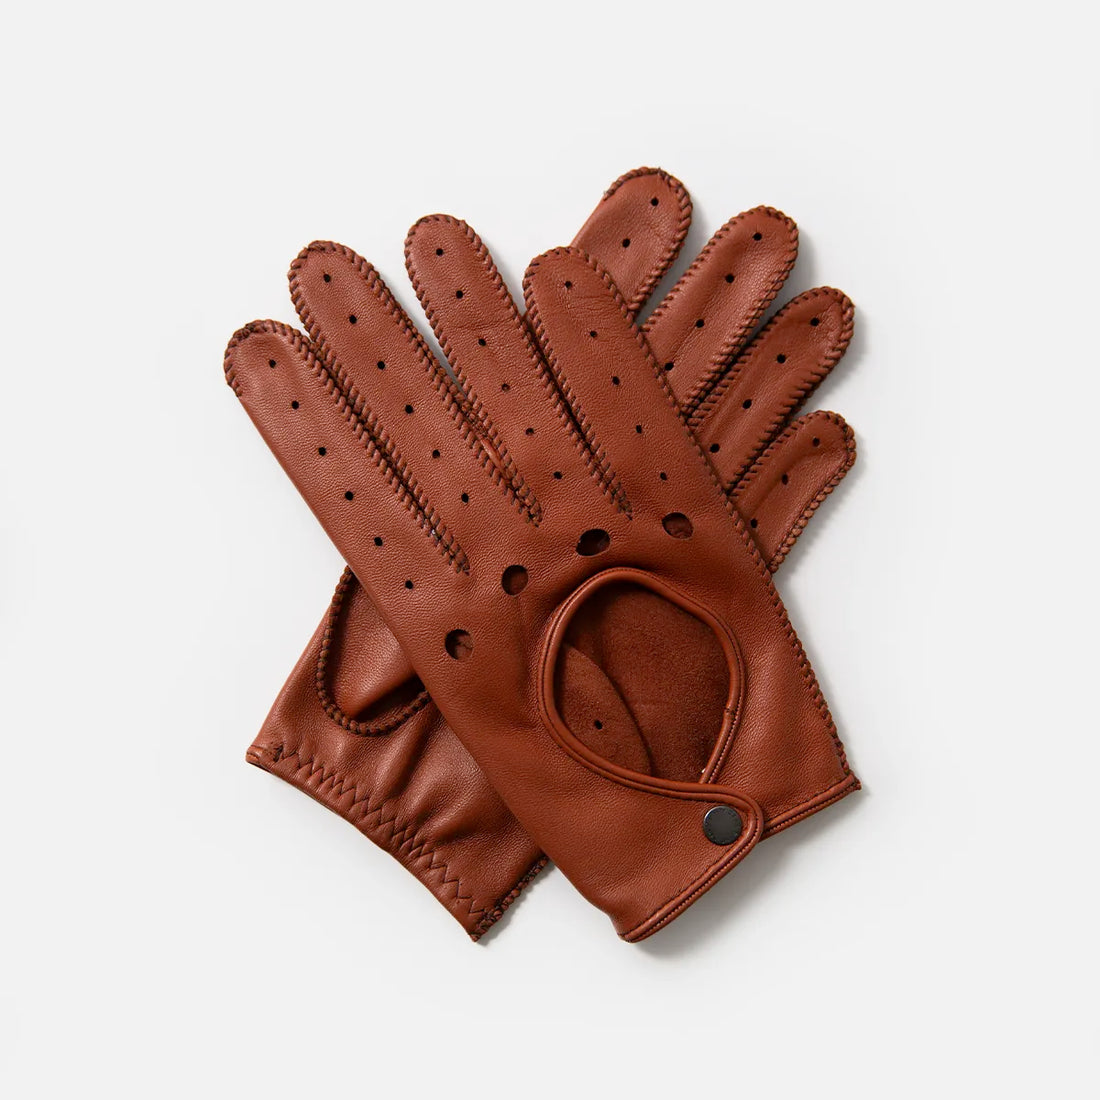 The Targa Driving Gloves in Roasted